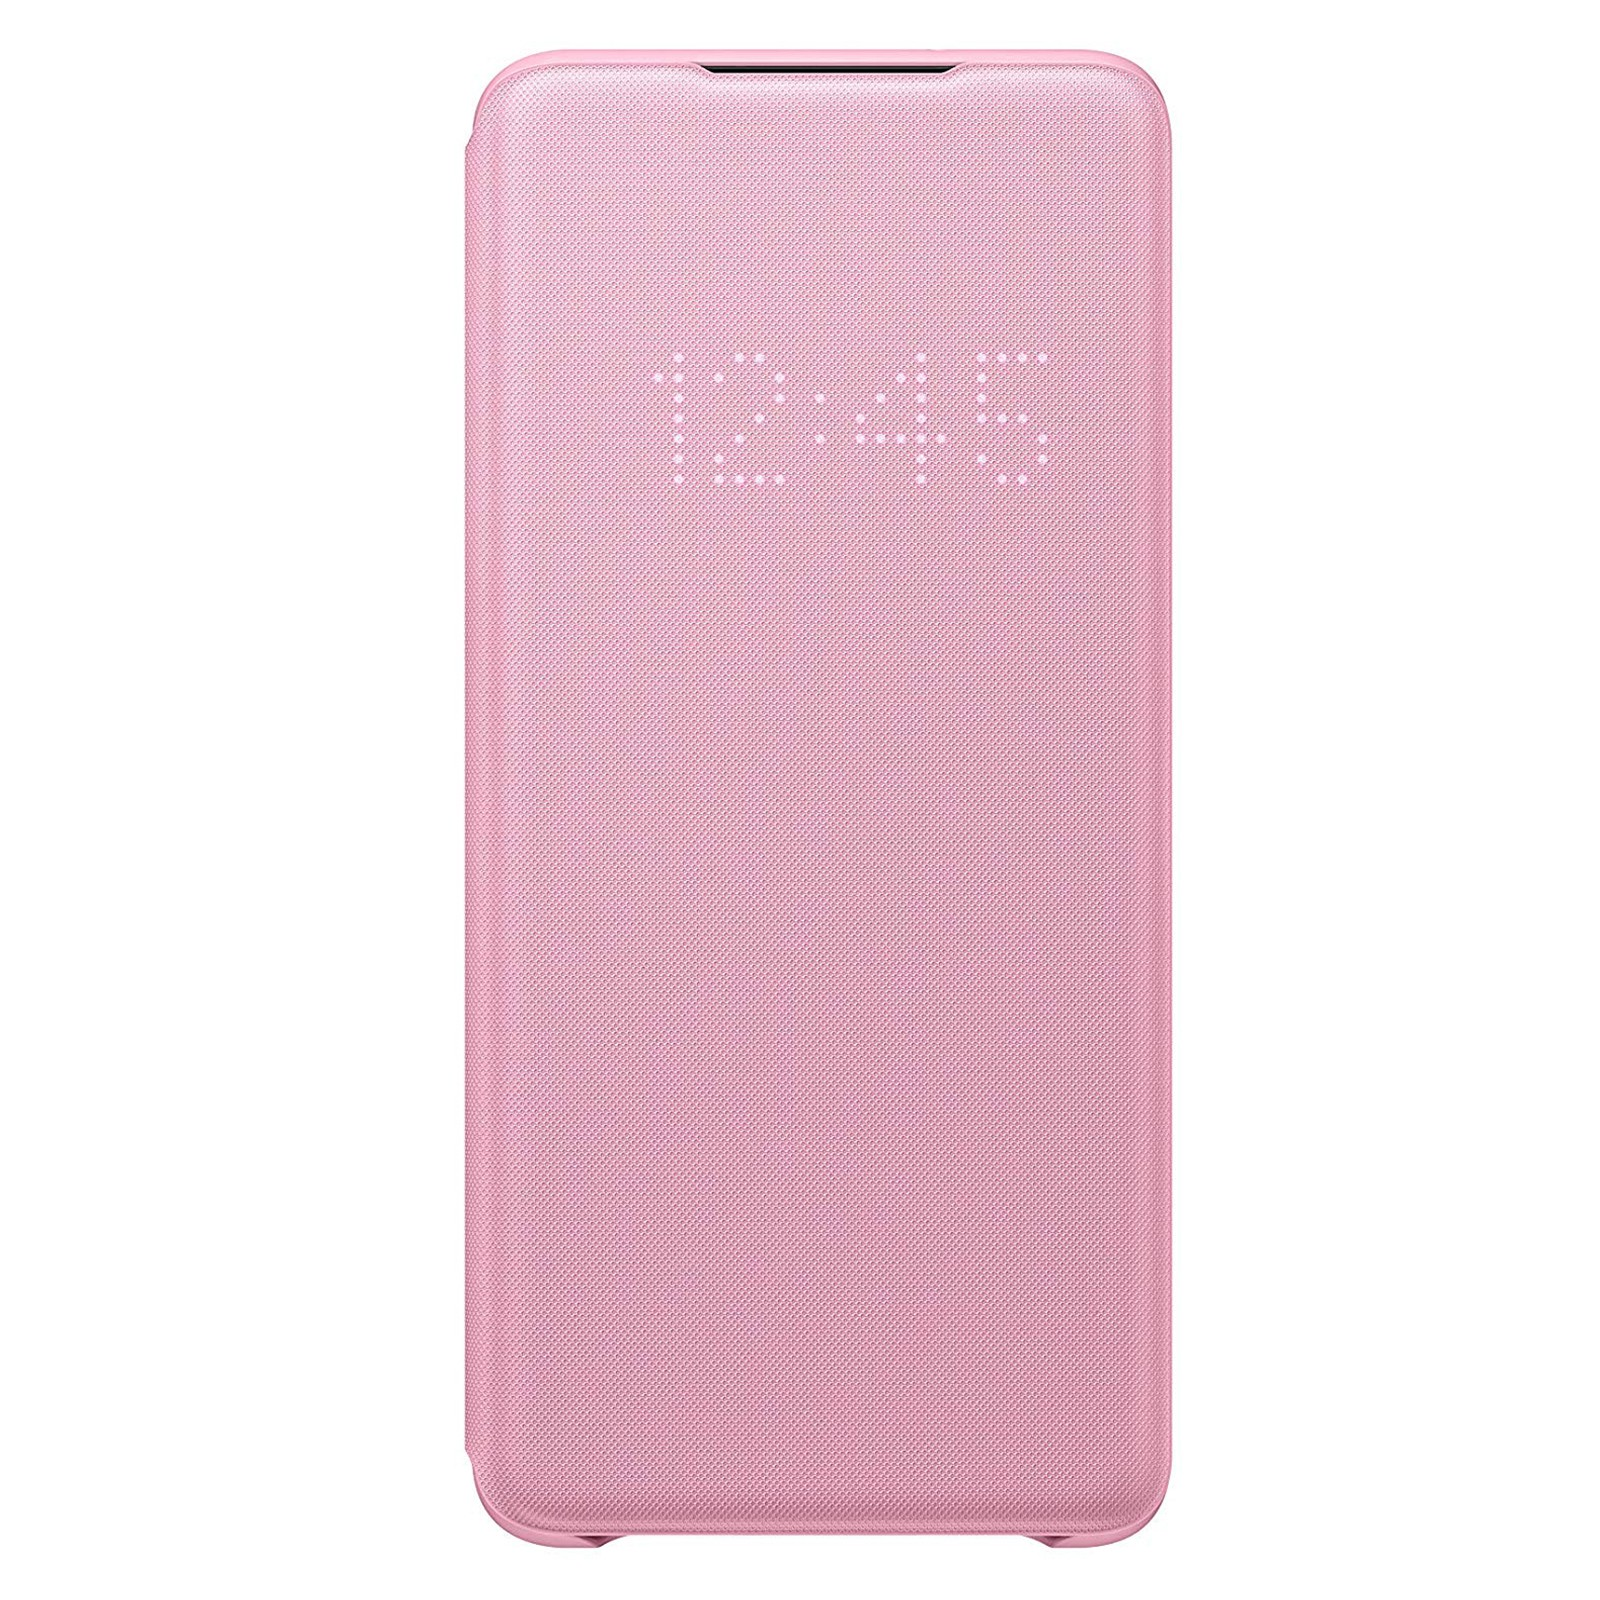 SAMSUNG Pink COVER VIEW S20+ Samsung, GALAXY LED Bookcover, PINK, S20+, EF-NG985 Galaxy